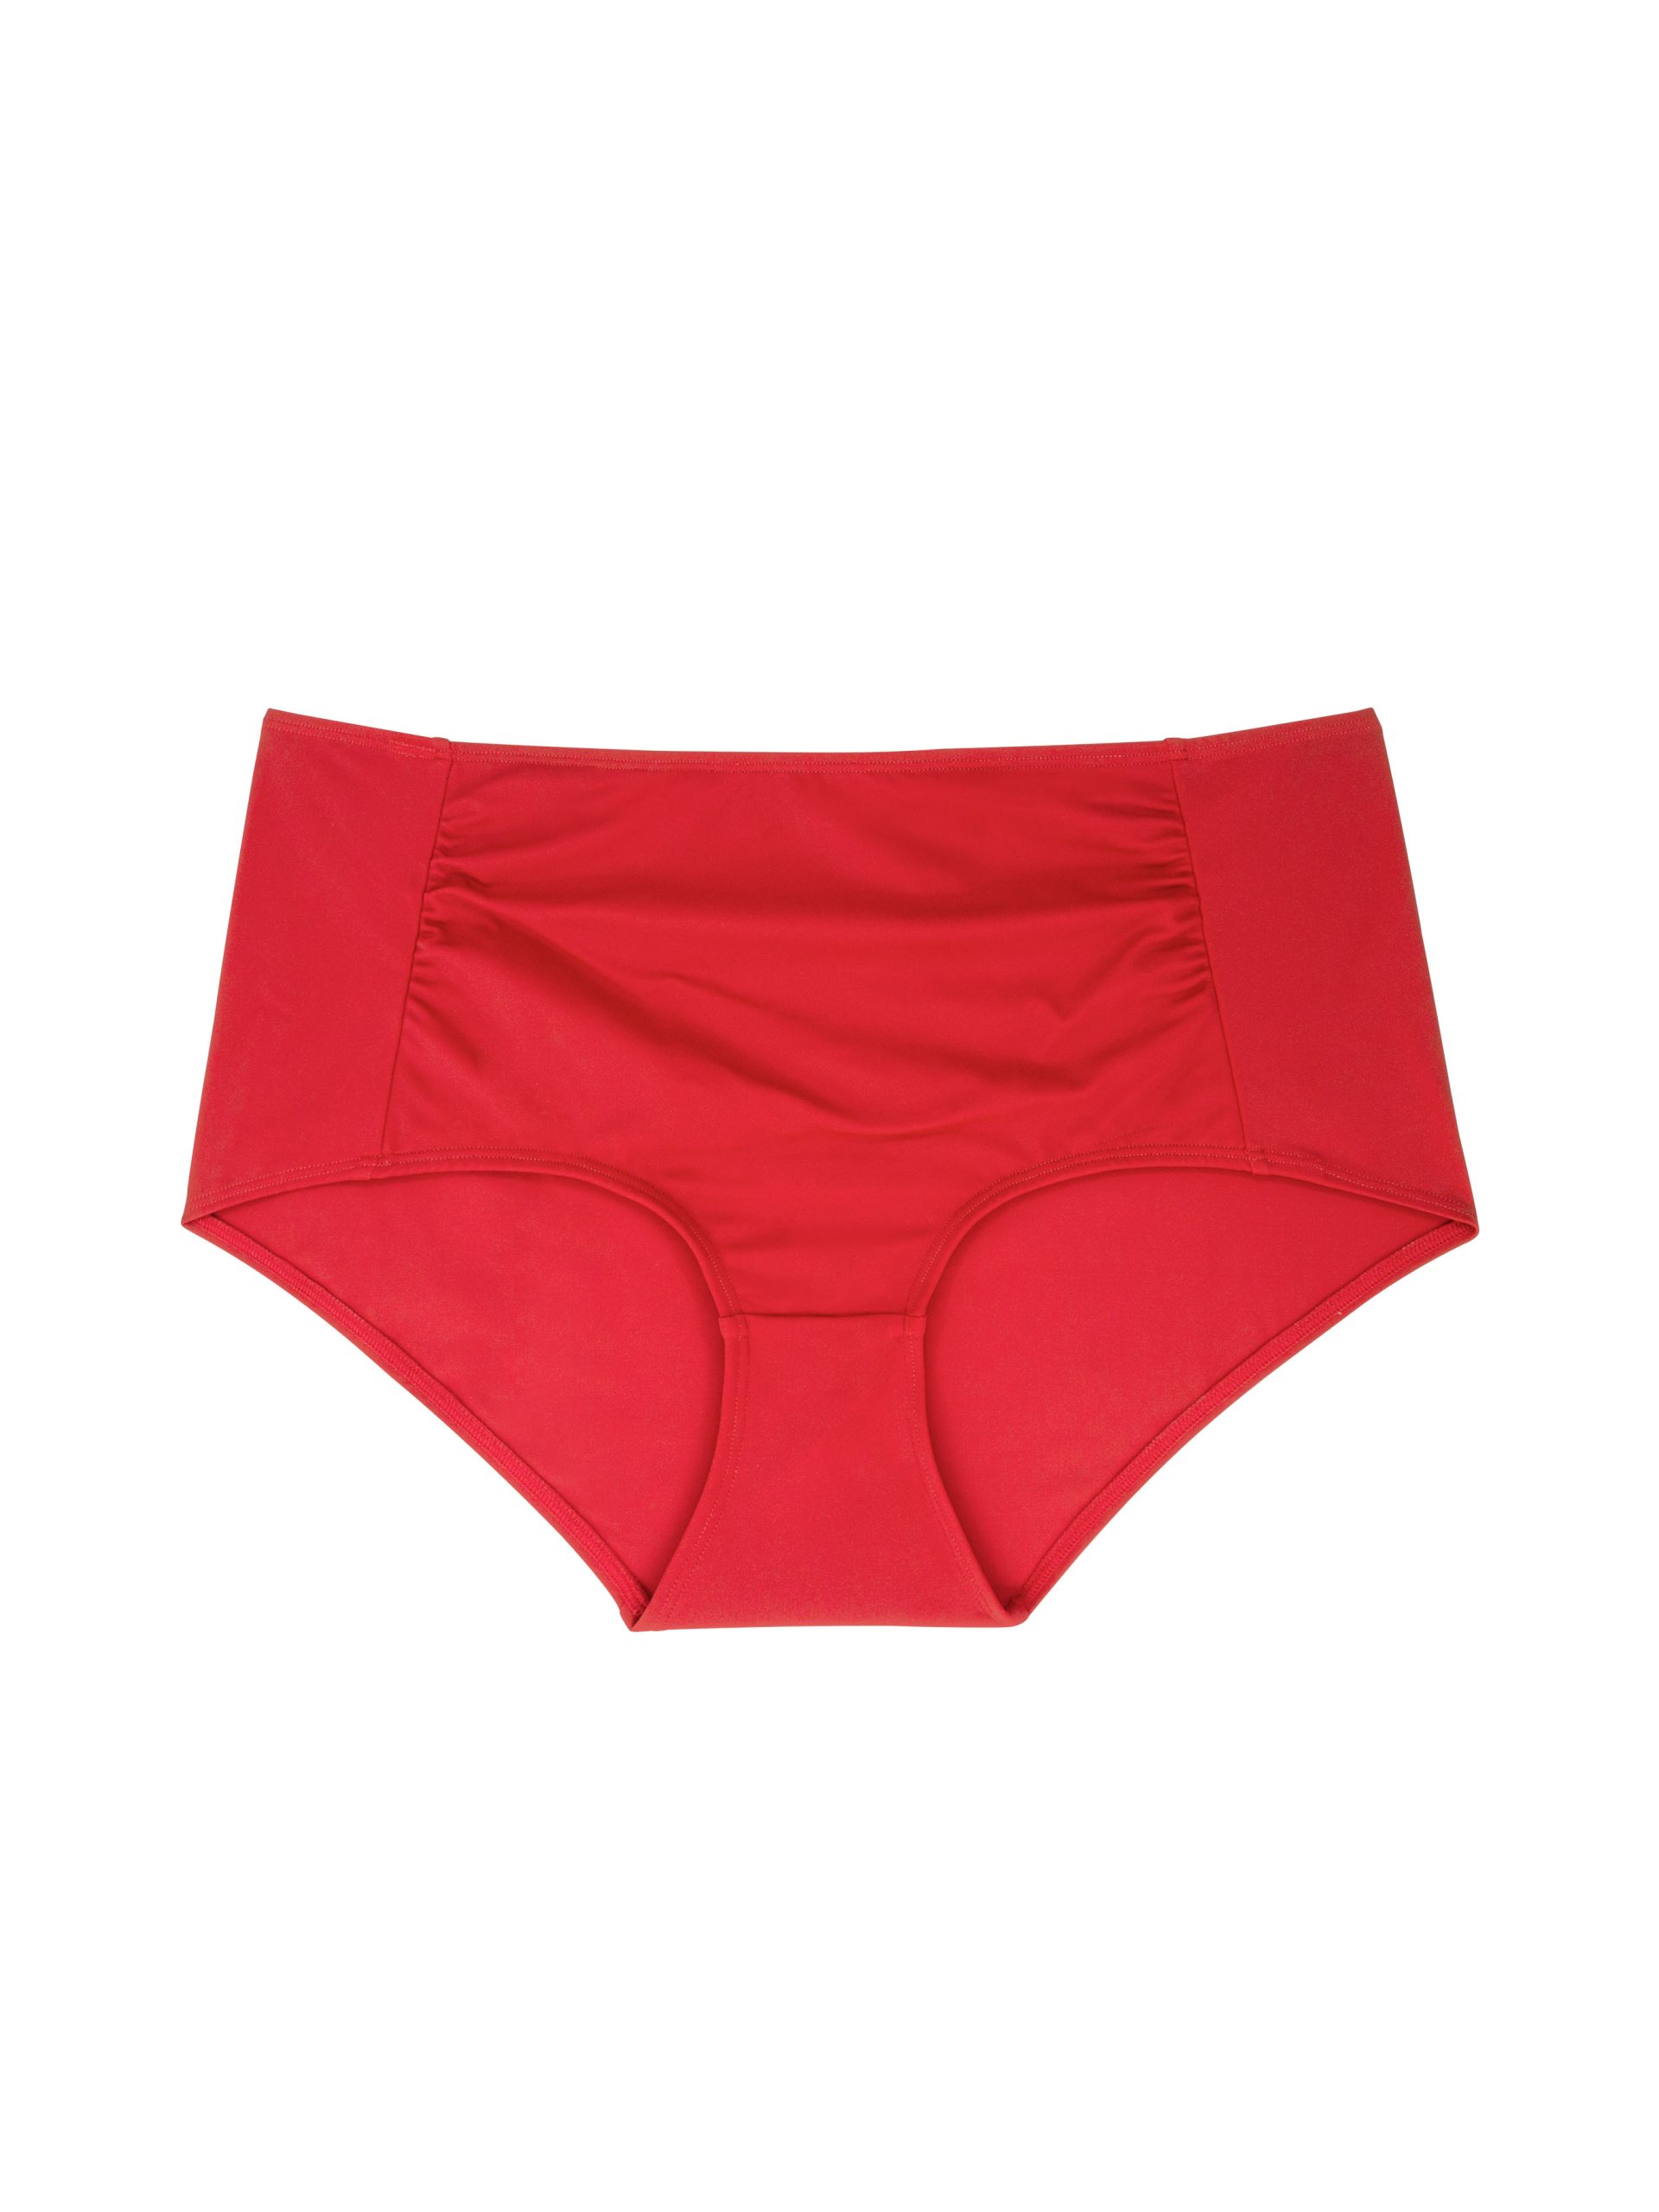 Classico high-waisted panties red